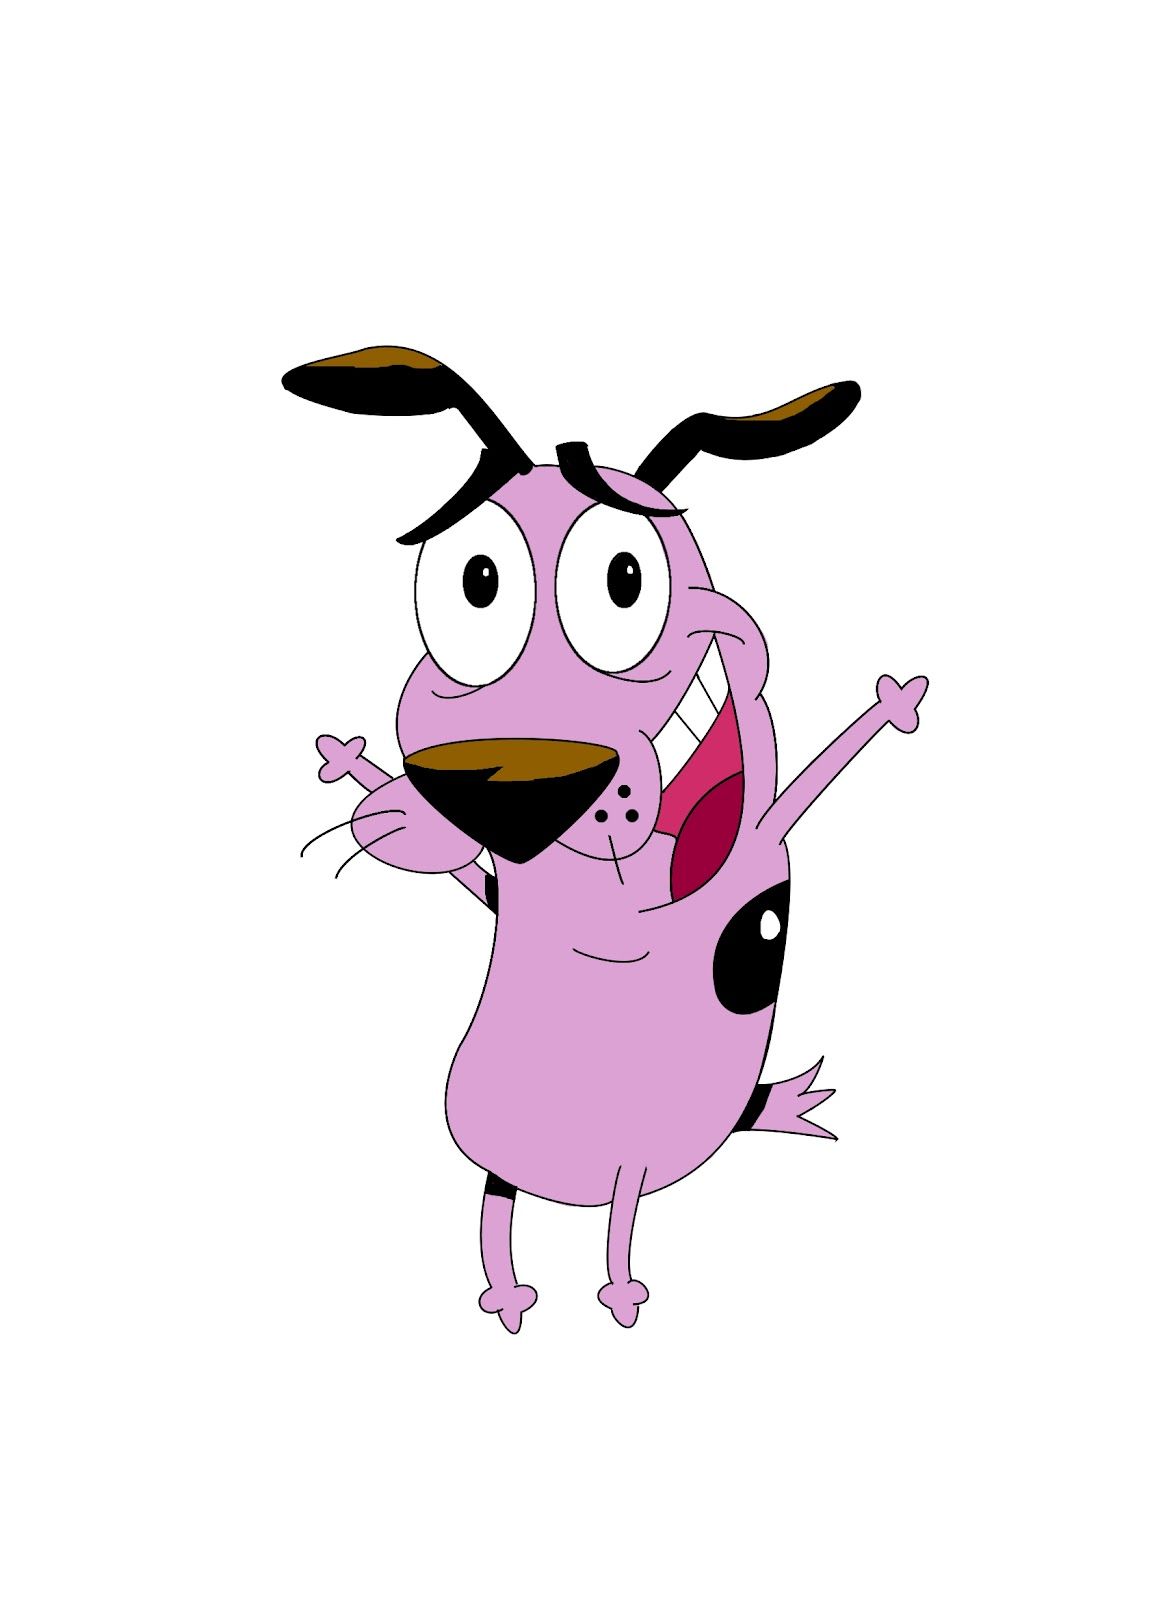 Free download Courage The Cowardly Dog Wallpaper U2Q86AY 8011 Kb 4USkY [1163x1600] for your Desktop, Mobile & Tablet. Explore Courage The Cowardly Dog Wallpaper. Courage the Cowardly Dog Wallpaper